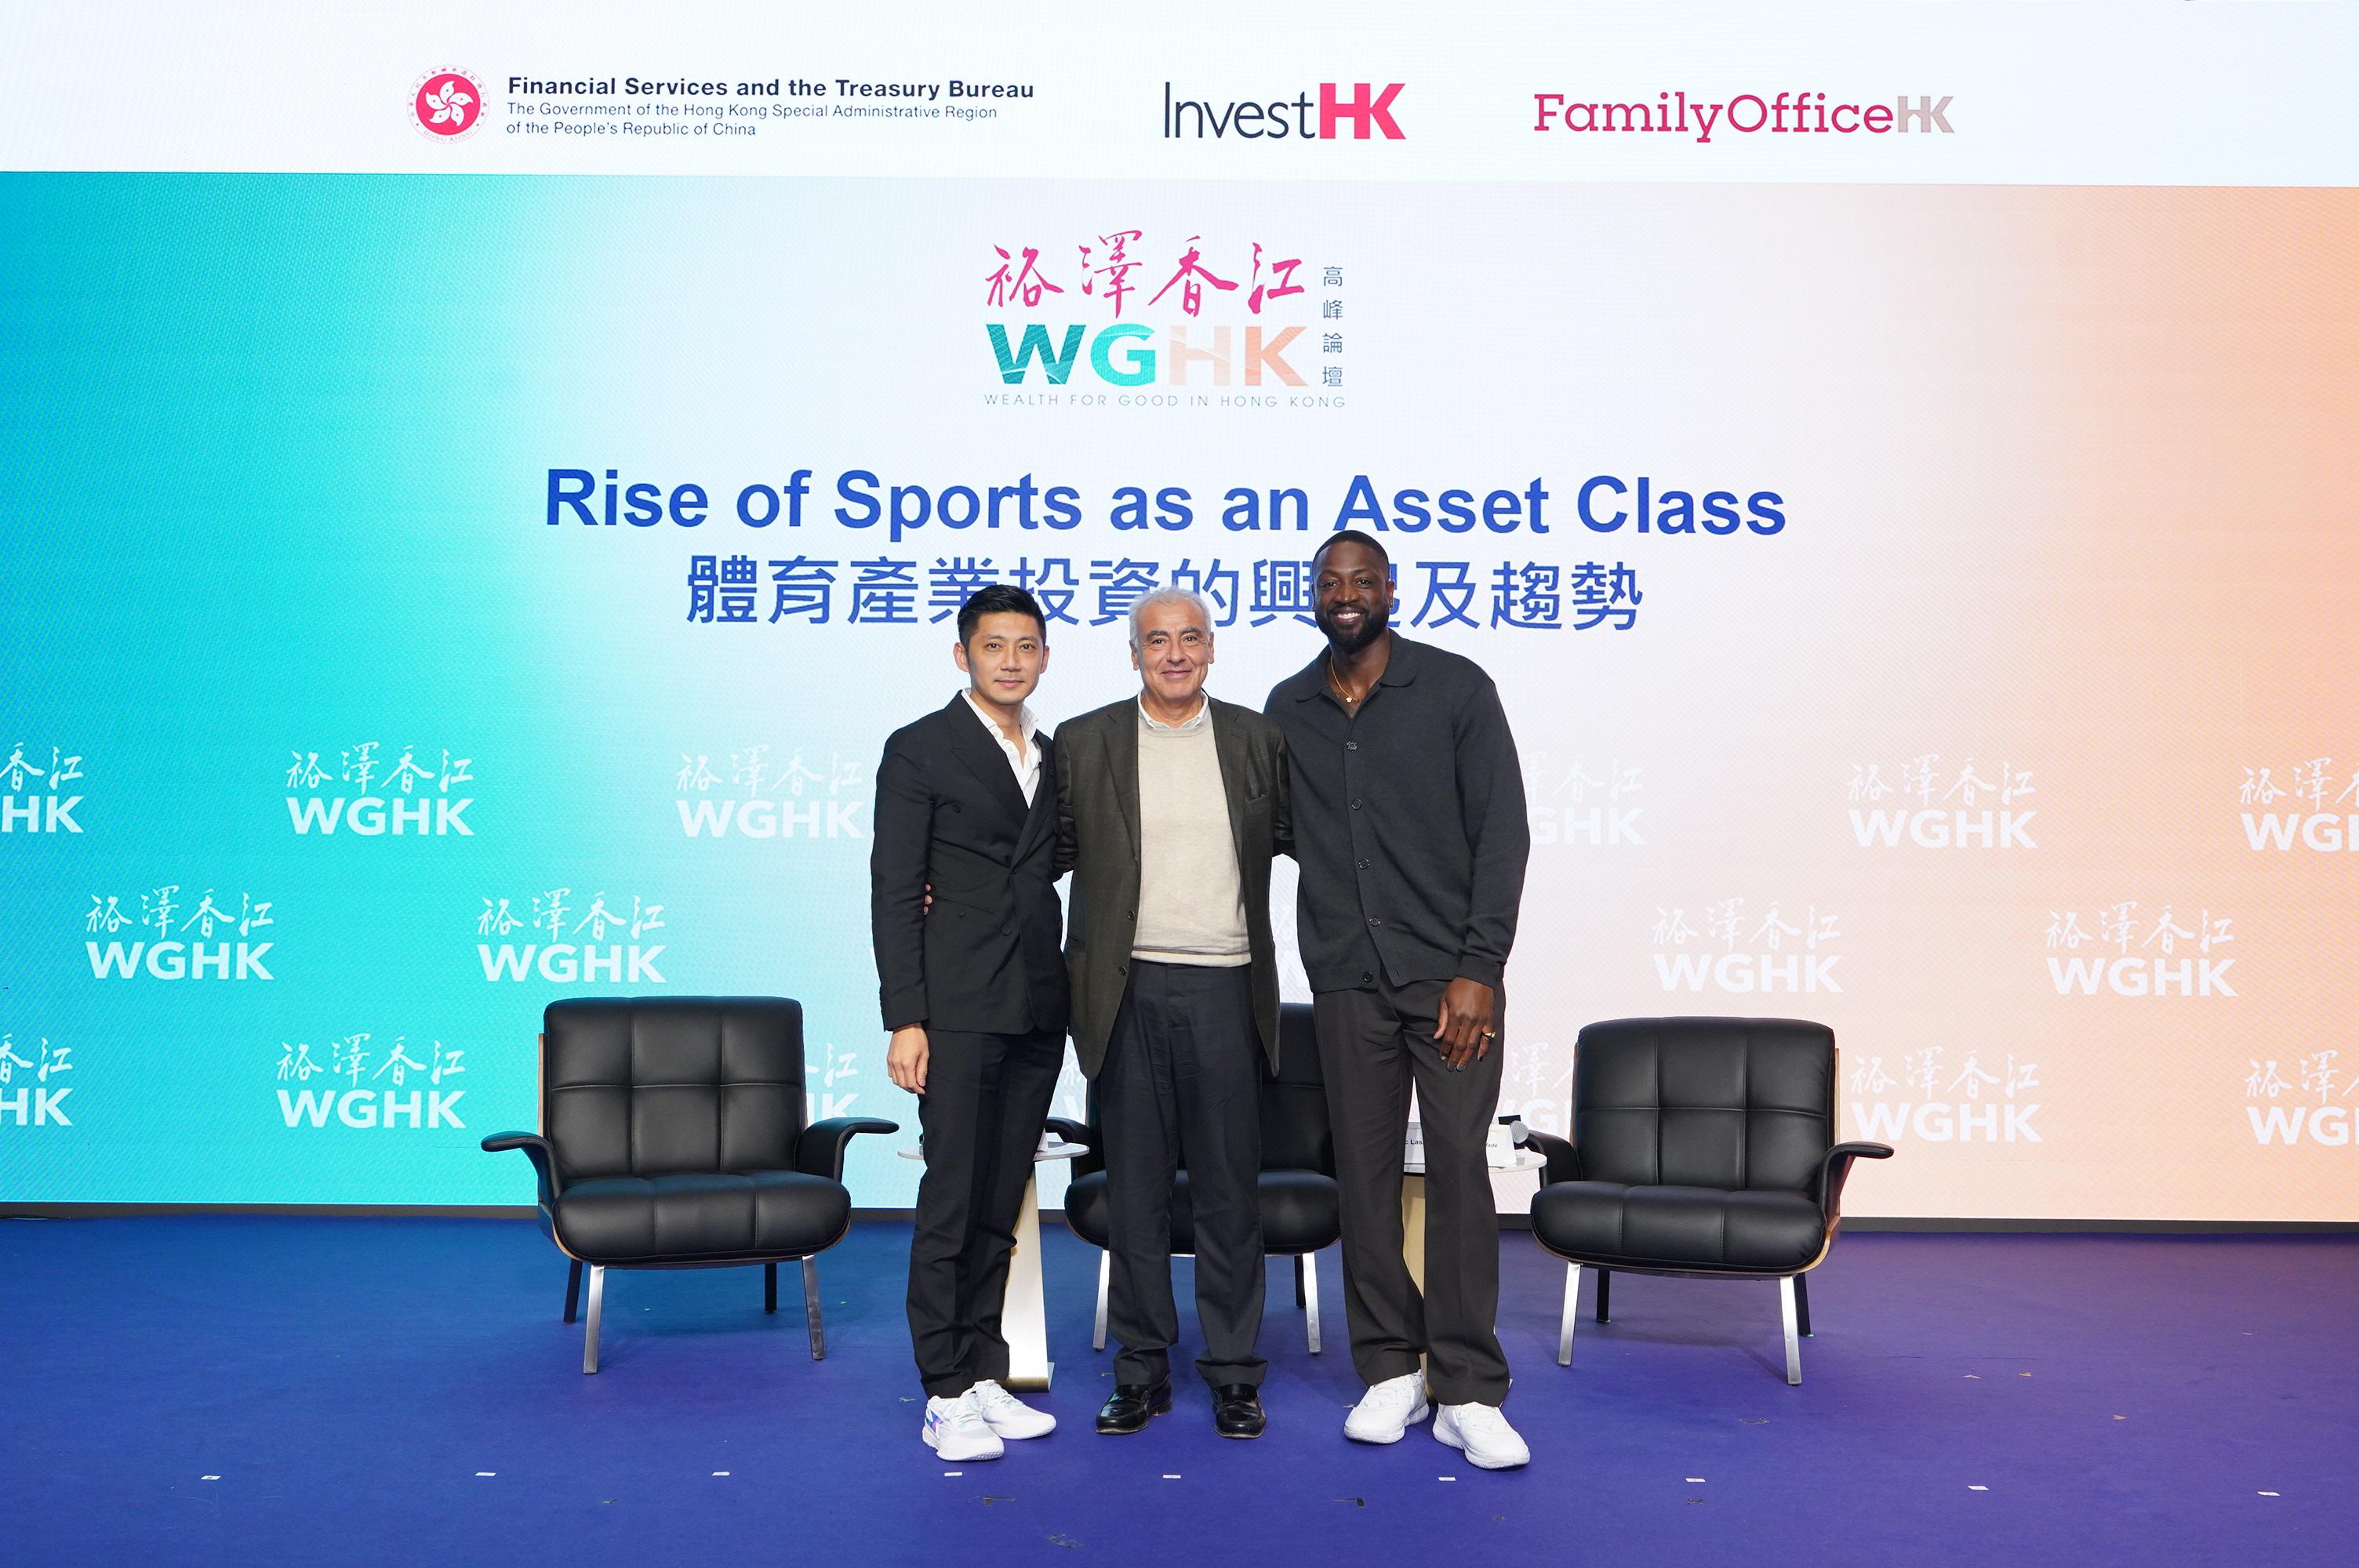 Pictured are moderator and speakers during the Fireside Chat called "Rise of Sports as an Asset Class" at the Wealth for Good in Hong Kong Summit Gala Dinner today (March 27) (from left): racing driver and Head of Private Office of Knight Frank Greater China, Mr Ho-Pin Tung; Chairman, Chief Executive Officer and Co-founder of Avenue Capital Group, Mr Marc Lasry; Chief Executive Officer, Wade Inc., Mr Dwyane Wade.